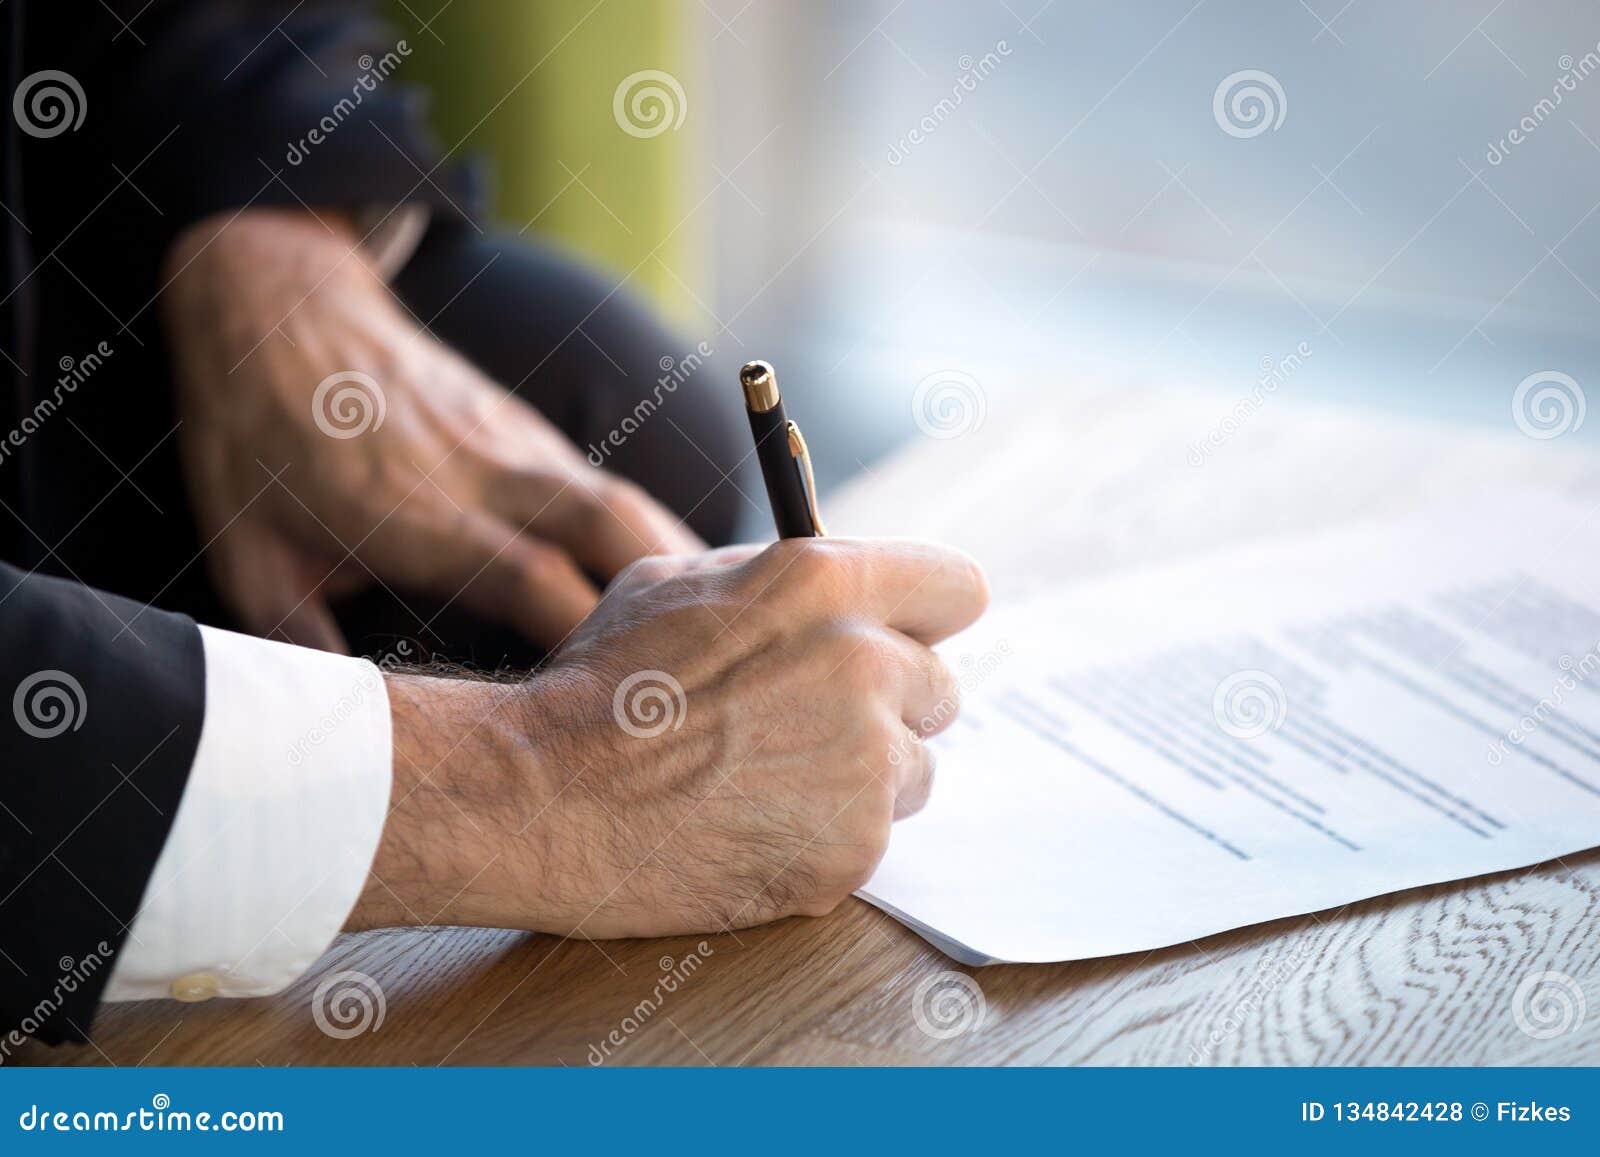 close up male hands puts his signature on official document